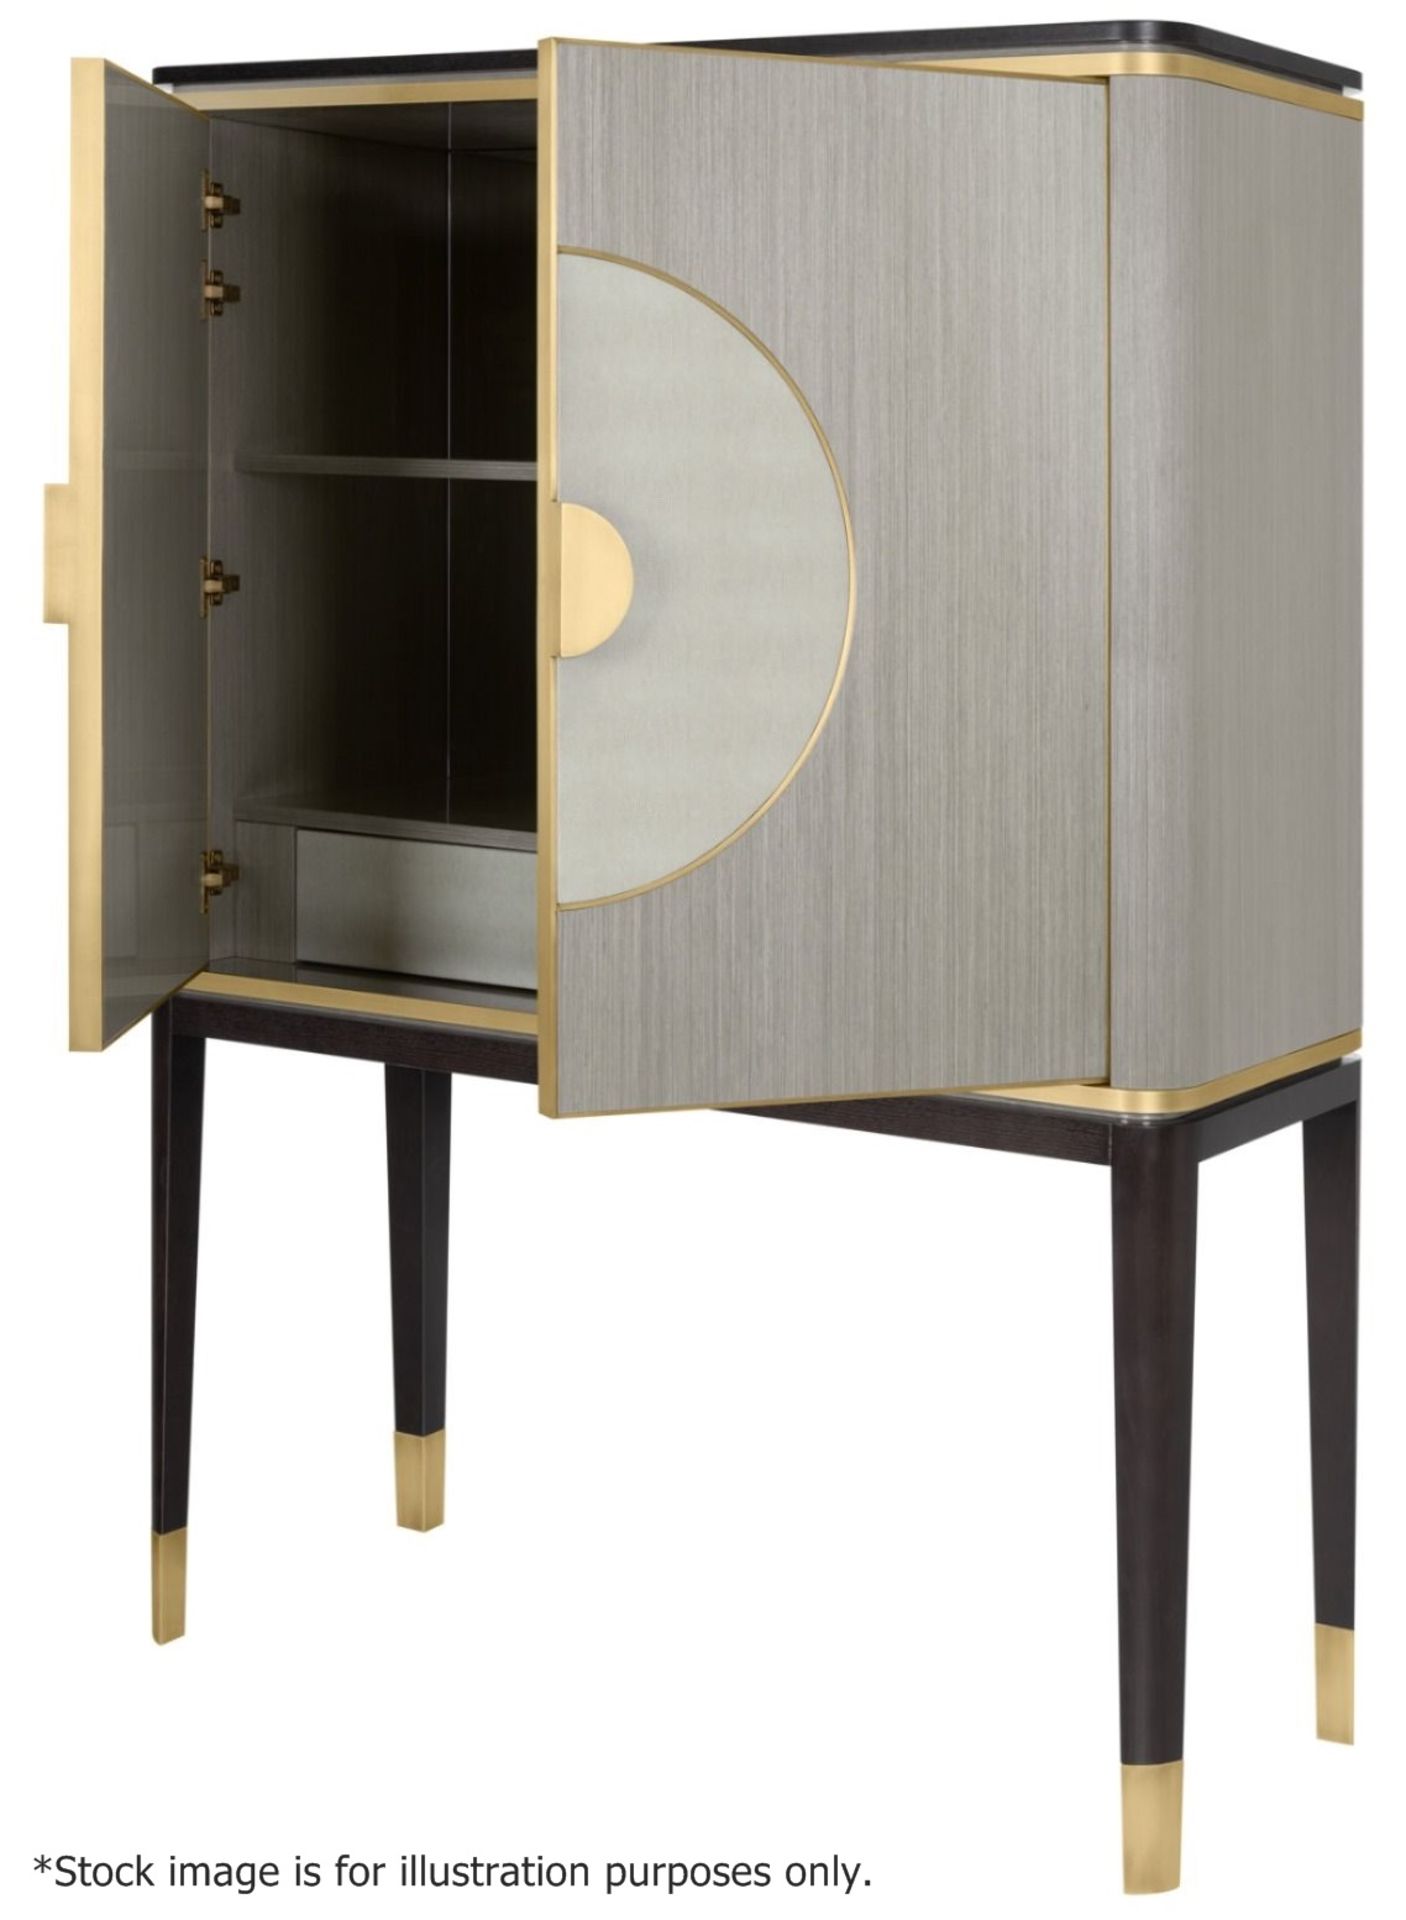 1 x FRATO 'Seville' Luxury Designer 2-Door Tall Cabinet With A High Gloss Finish - RRP £7,968 - Image 14 of 15